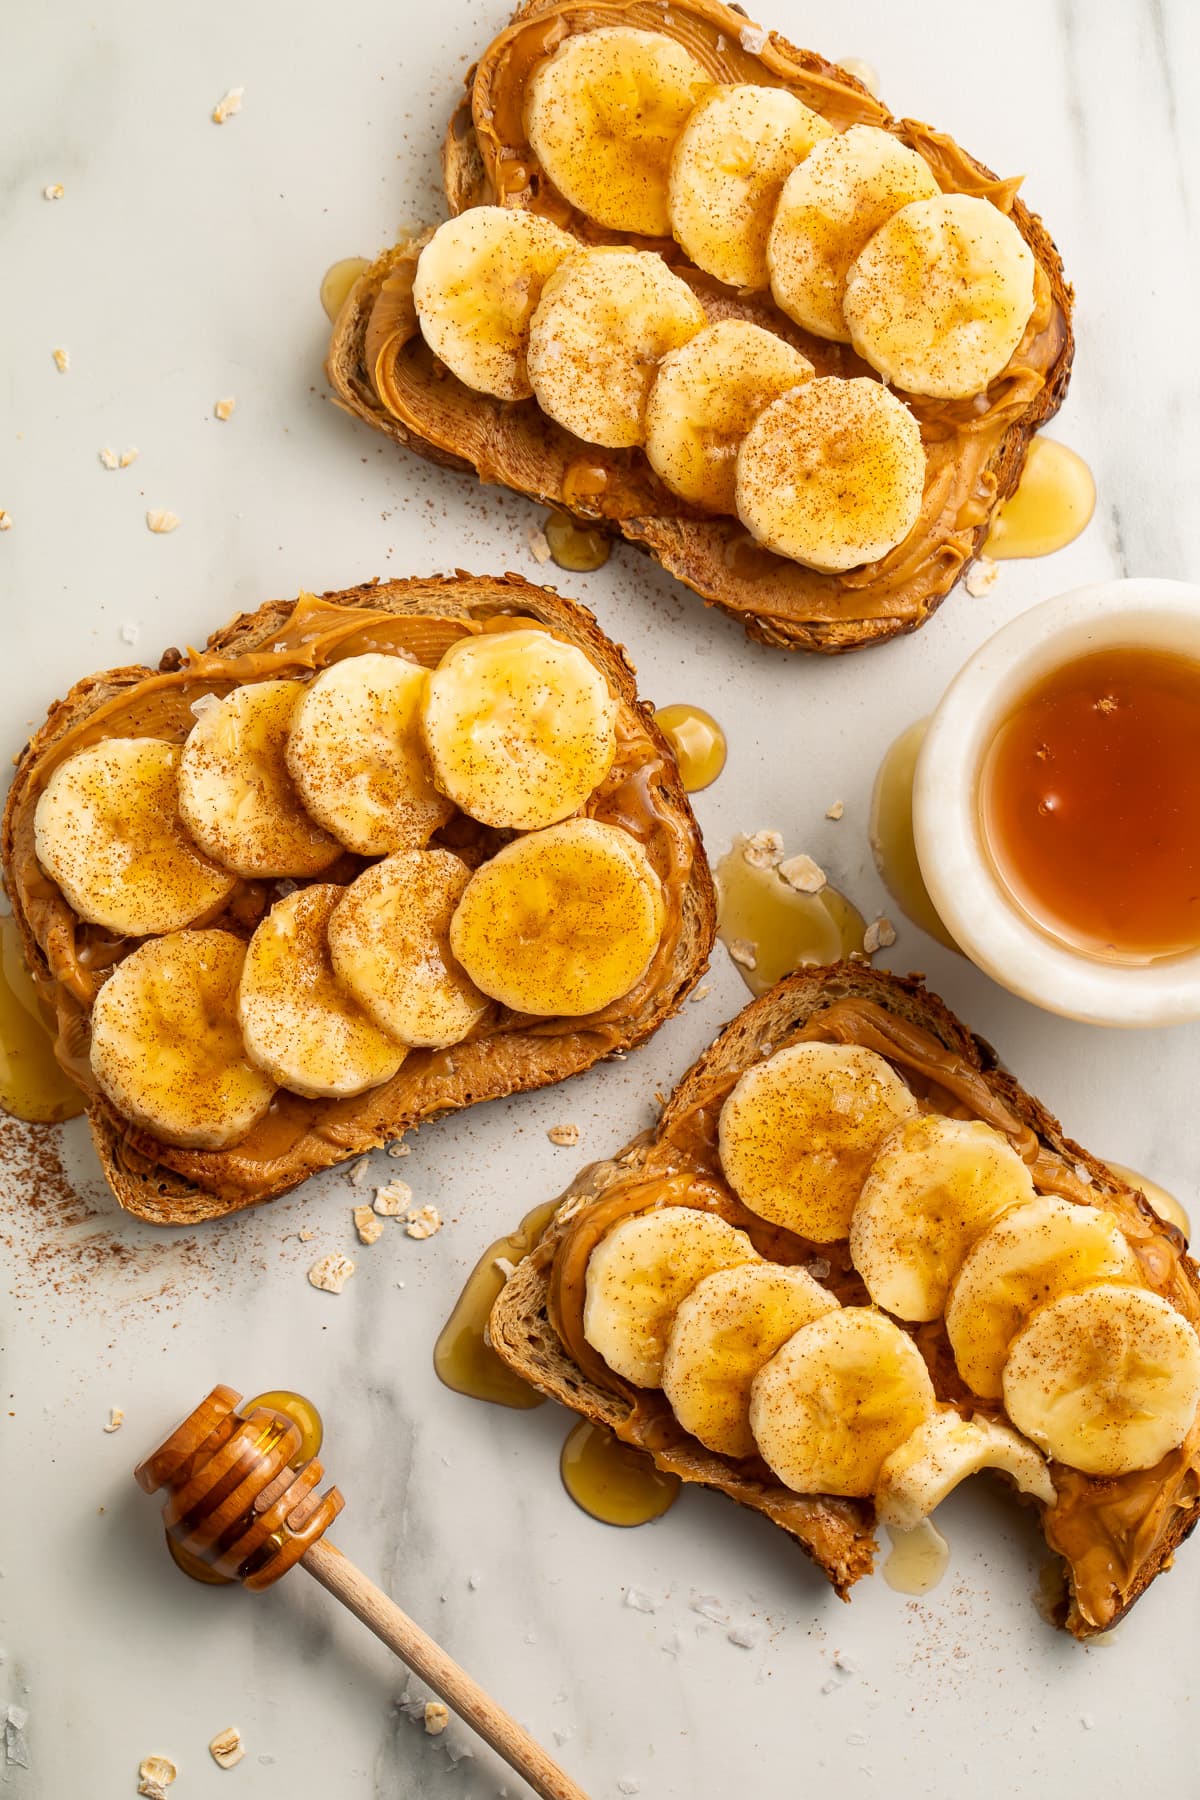 Overhead view of 3 slices of peanut butter banana toast drizzled with honey then topped with a dash of cinnamon and sea salt.